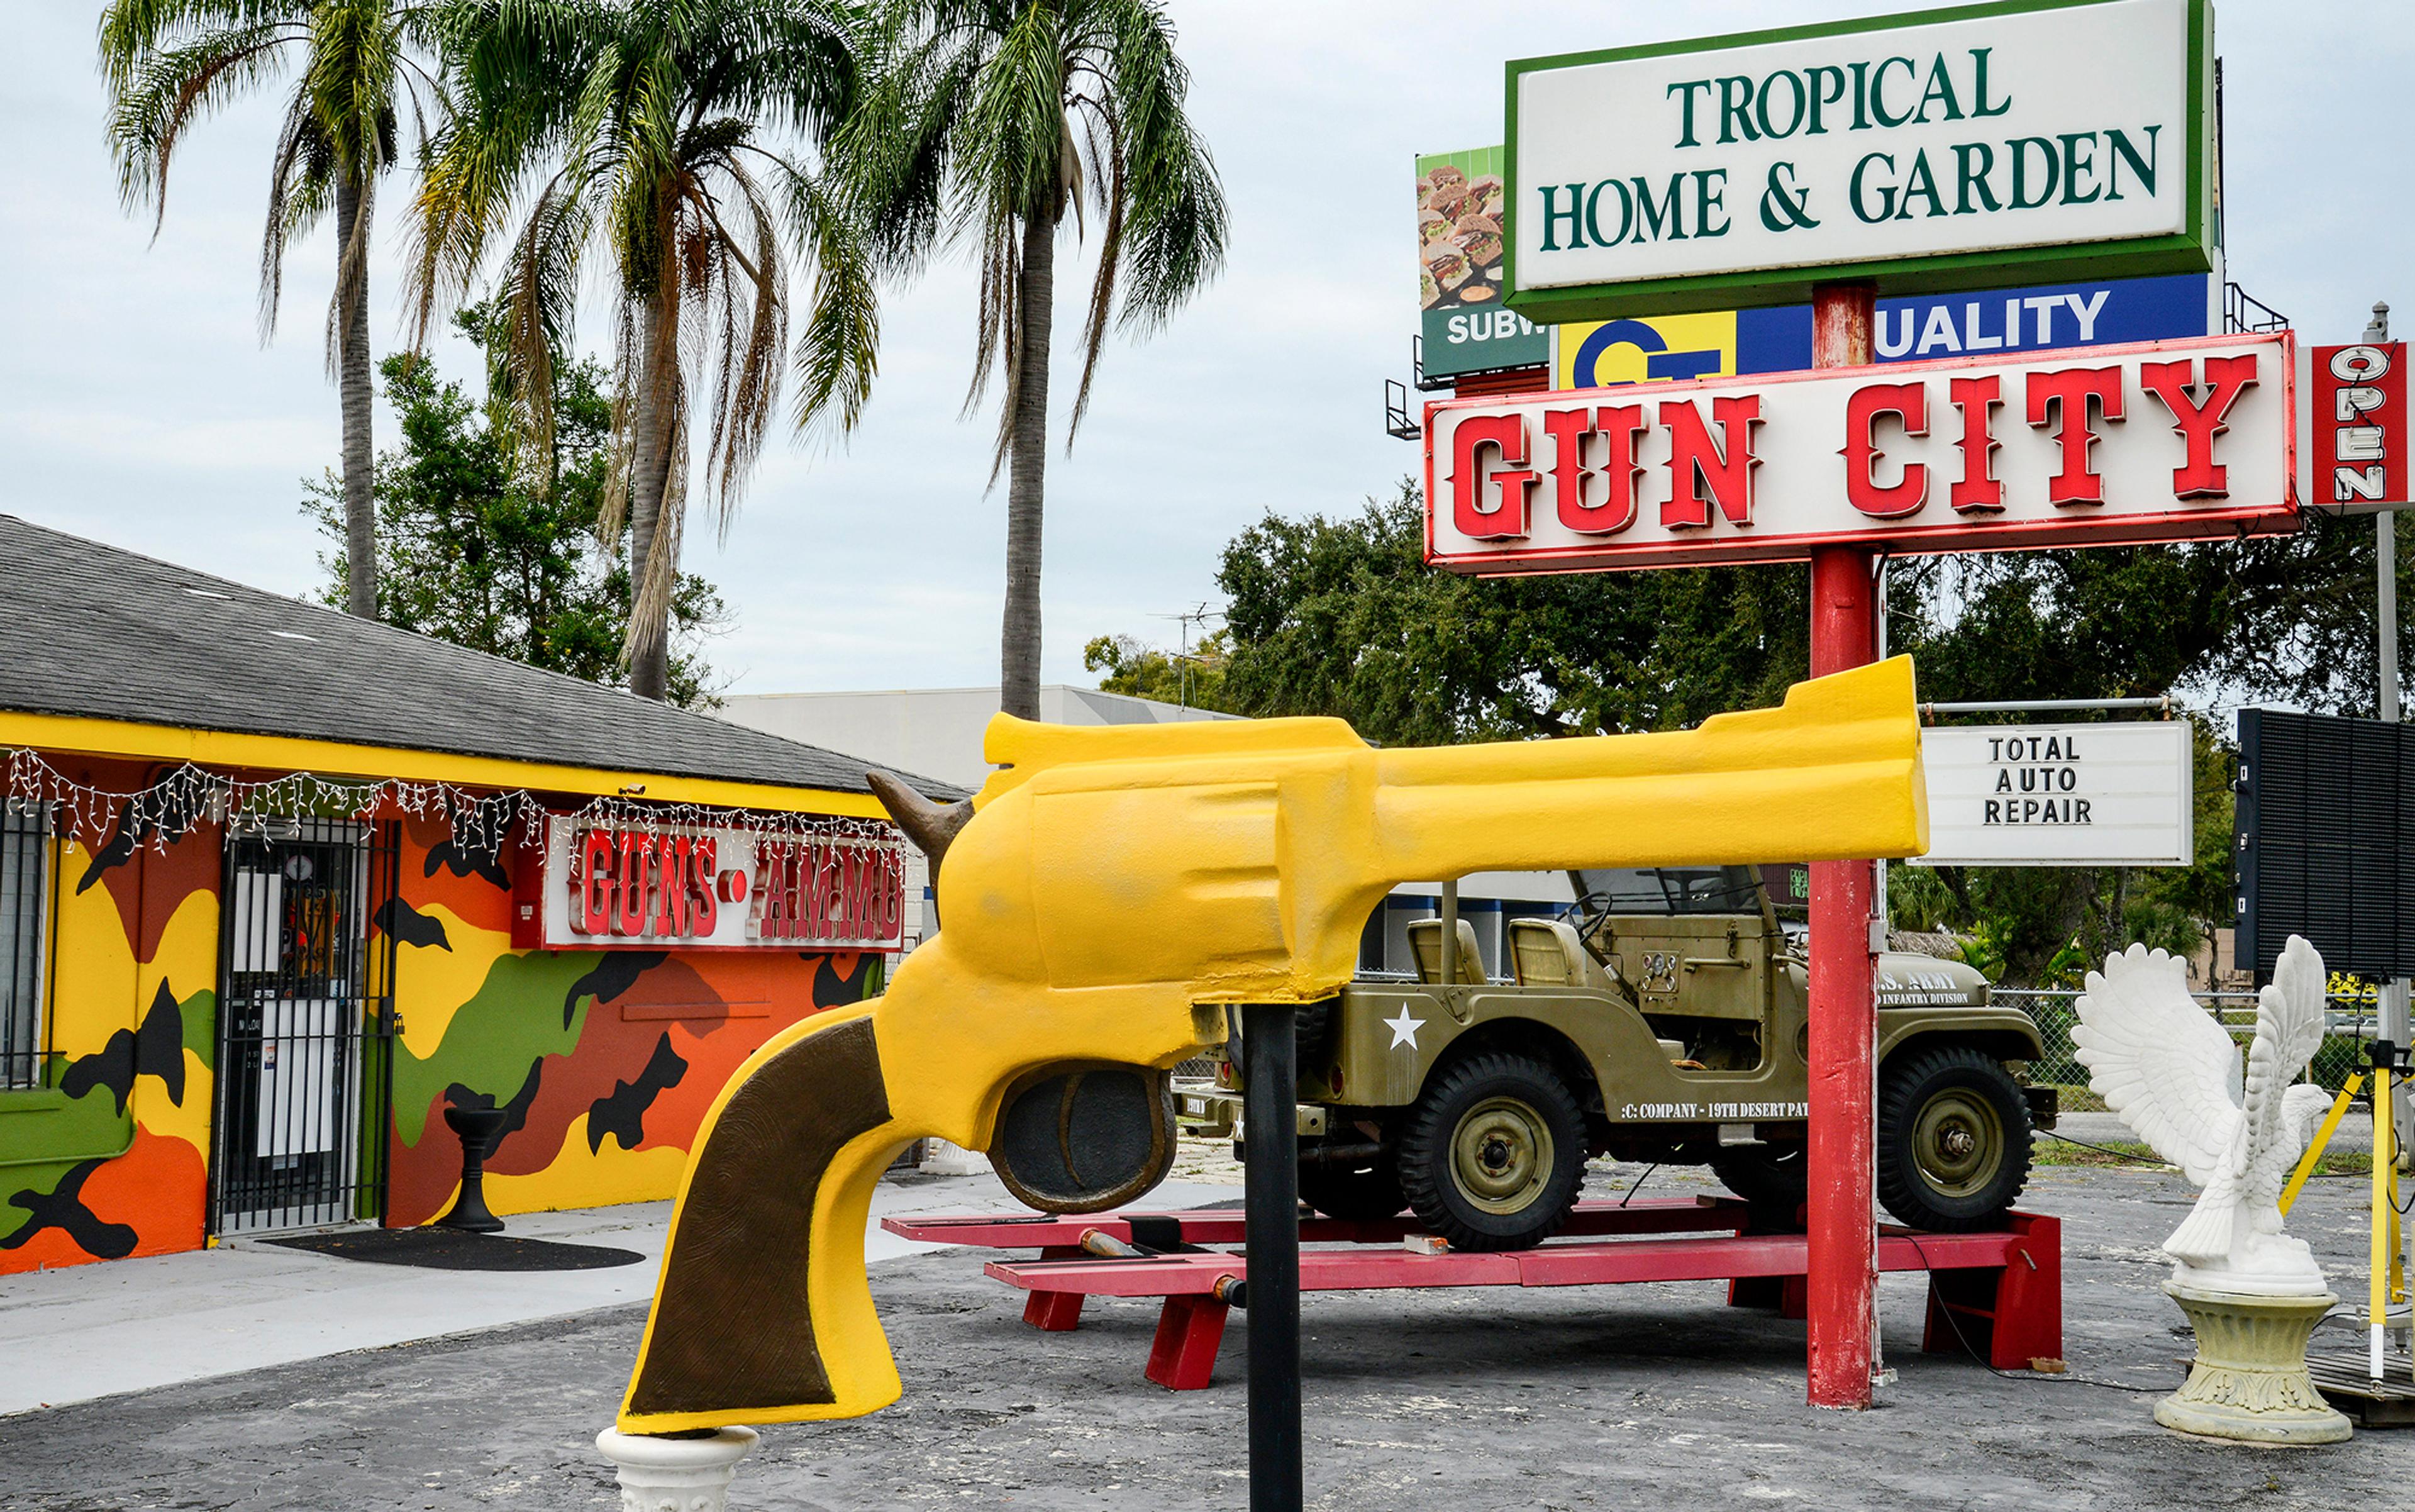 An oversized yellow plastic revolver gun displayed outside a brightly painted shop. There are palm trees in the background